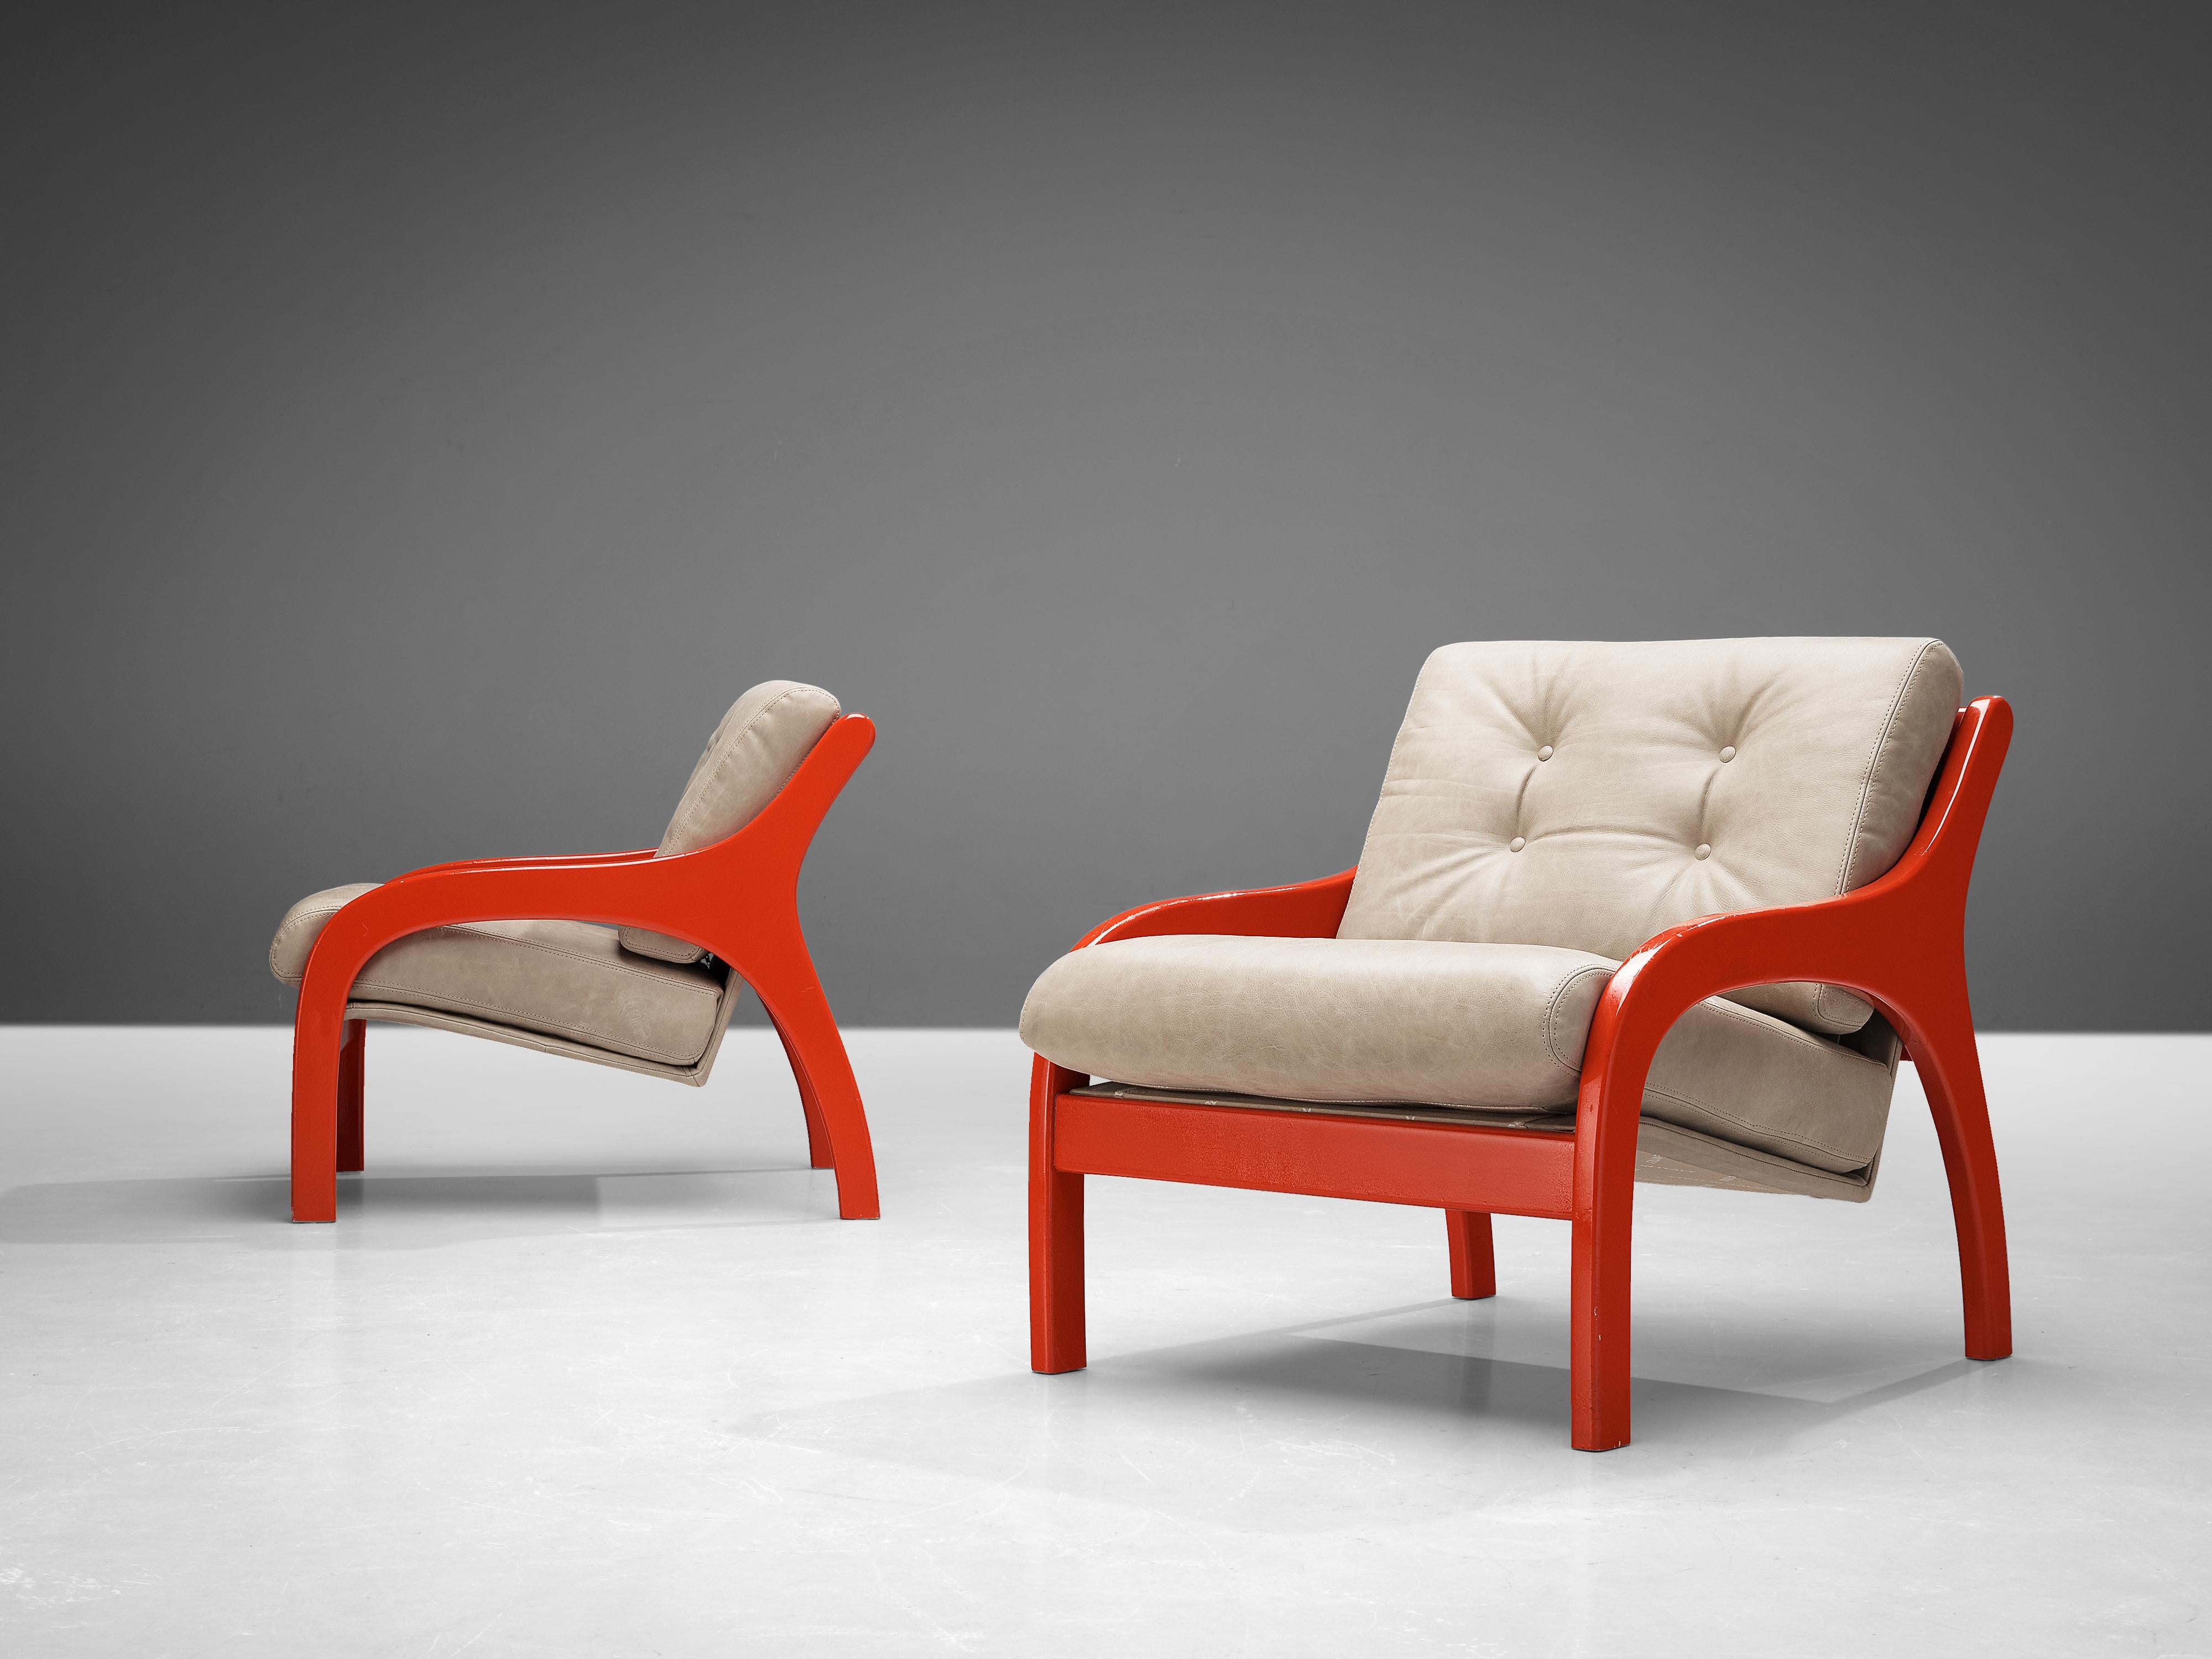 Claudio Salocchi for Sormani, ´Vivalda´ armchairs, lacquered wood, leather, Italy, 1960s. 

Eccentric pair of 'Vivalda' armchairs designed by Claudio Salocchi for Sormani. The chairs have a solid curved lacquered wooden frame in bright red,